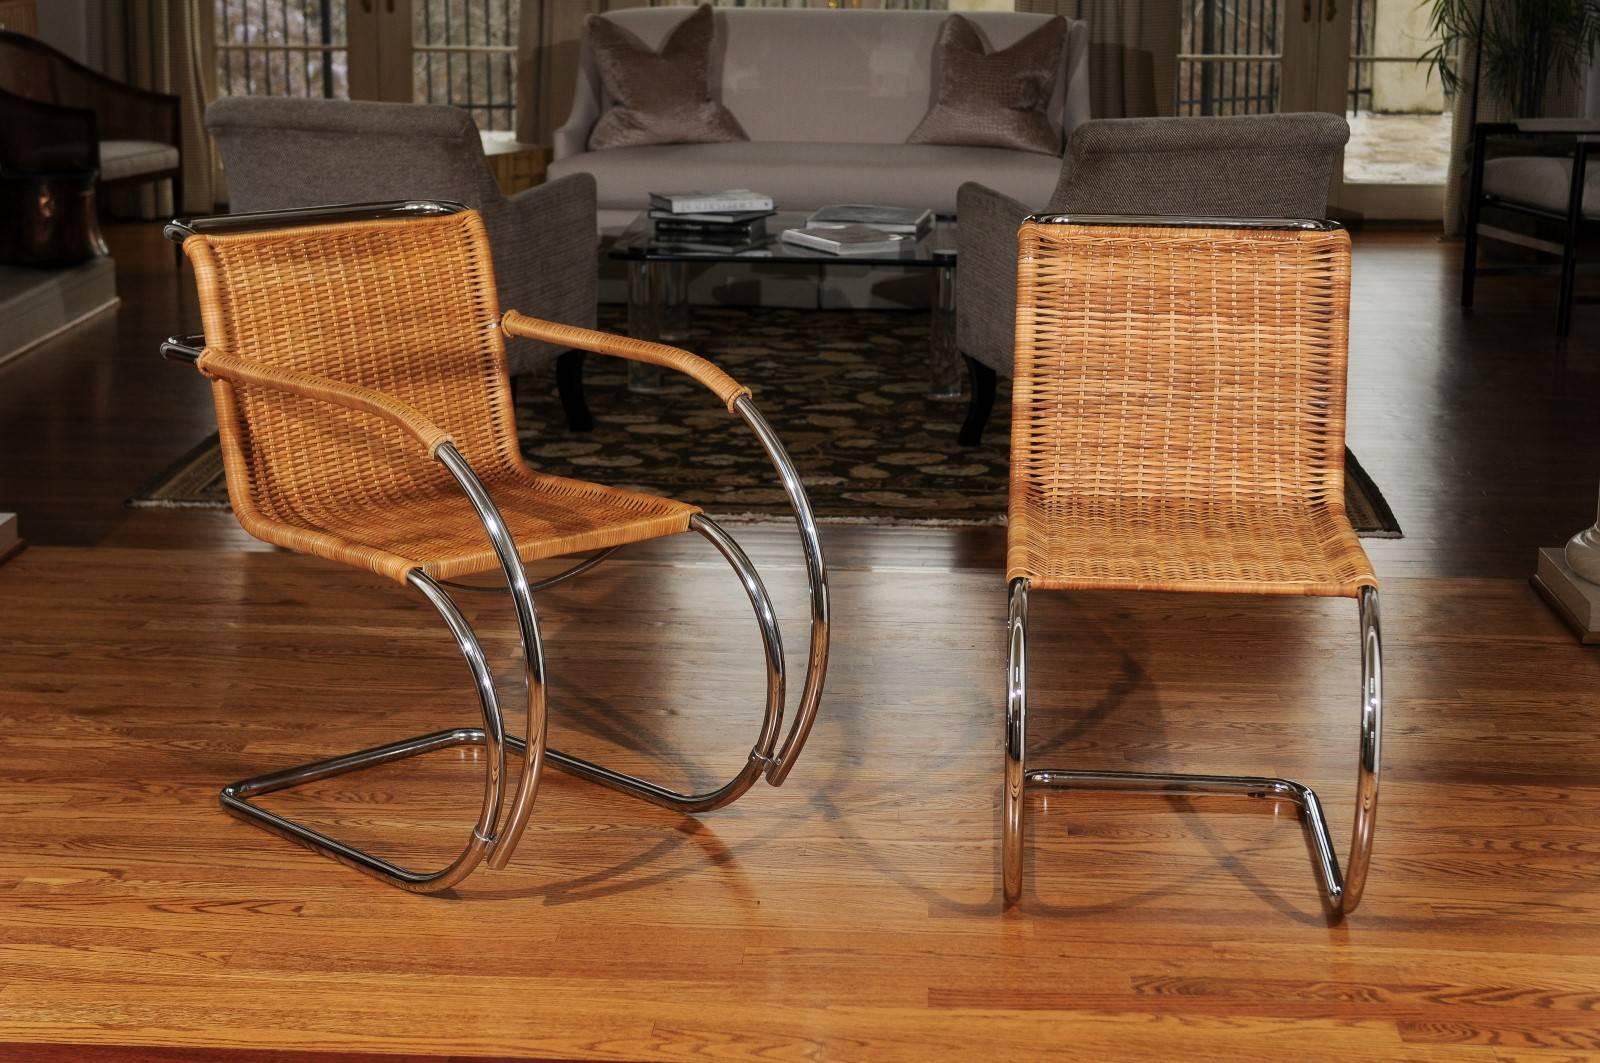 A fabulous set of eight (8) vintage wicker and chrome dining chairs in the style of Mies van der Rohe, circa 1970. Stellar quality and craftsmanship. This coveted cane version is always difficult to find and next to impossible to locate in